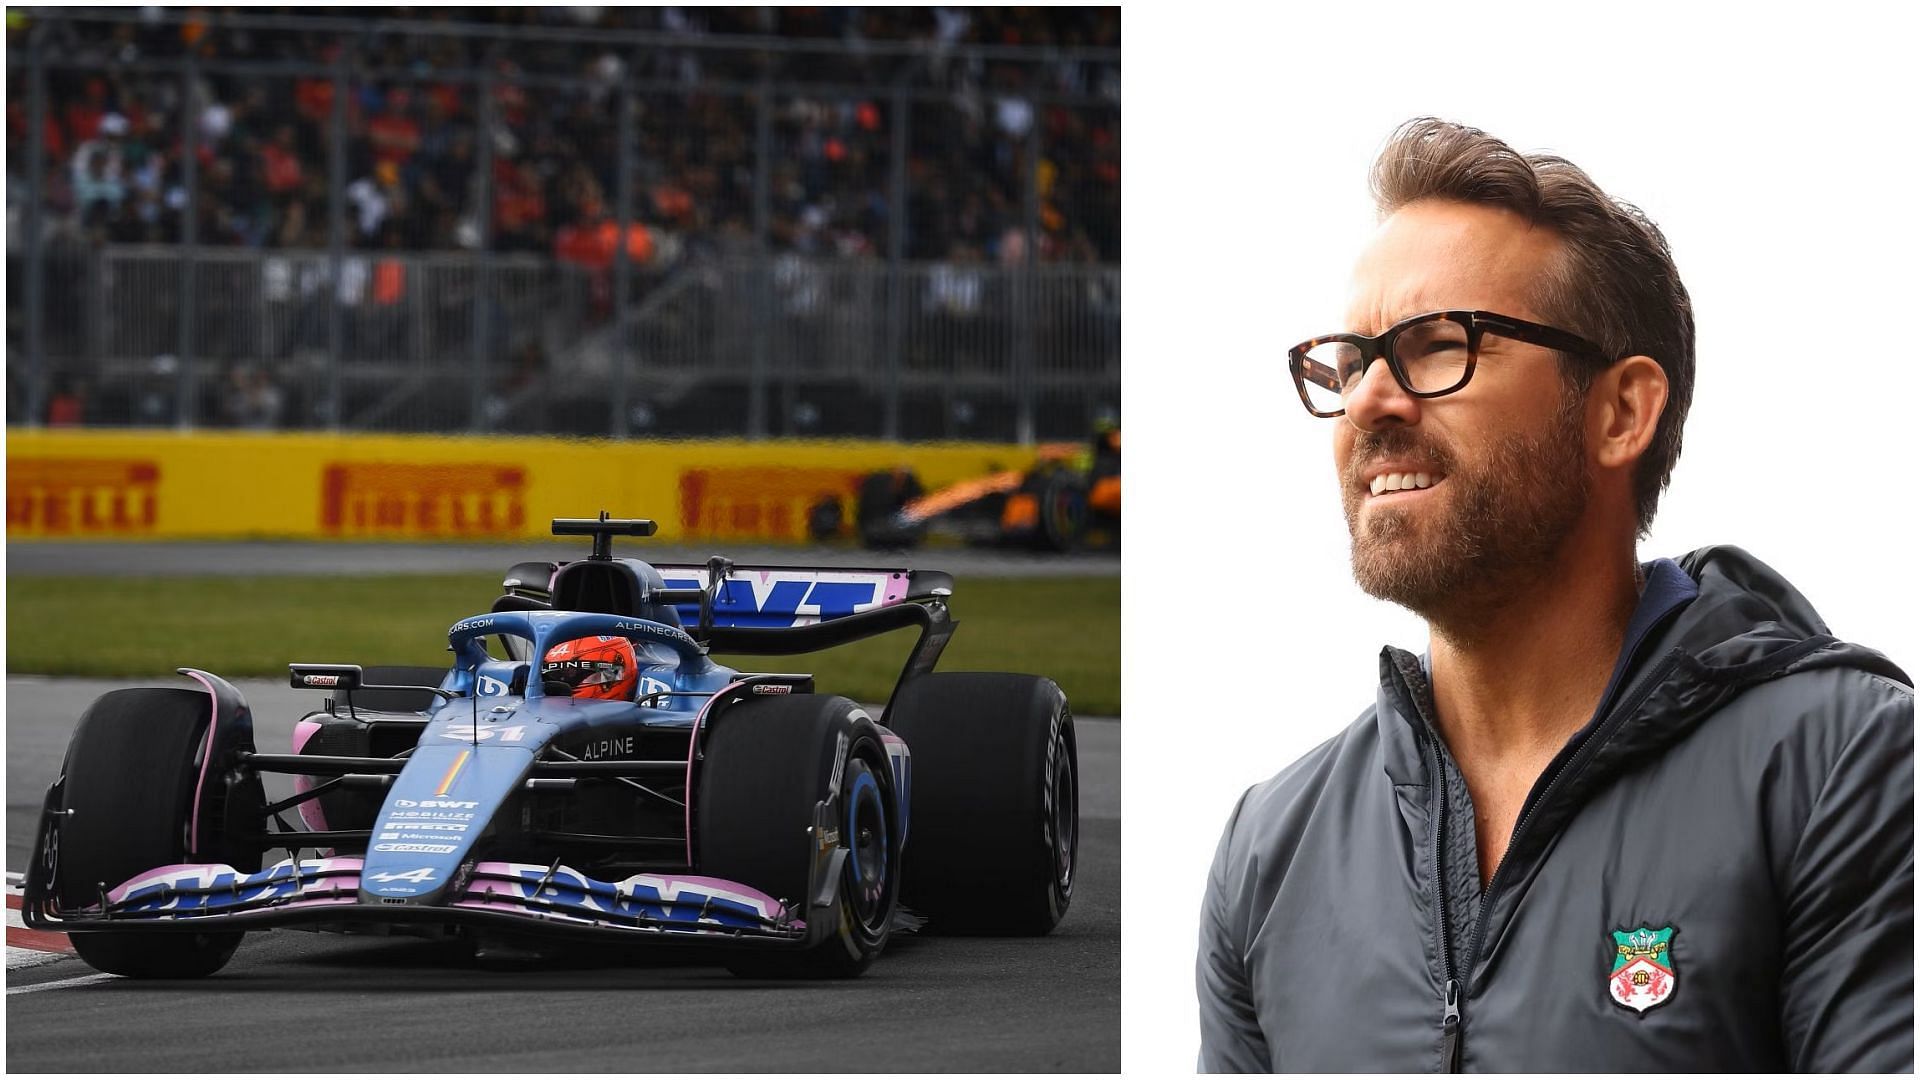 Ryan Reynolds is one of the many investors that have funded $200 million to Alpine F1 team (Collage via Sportskeeda)